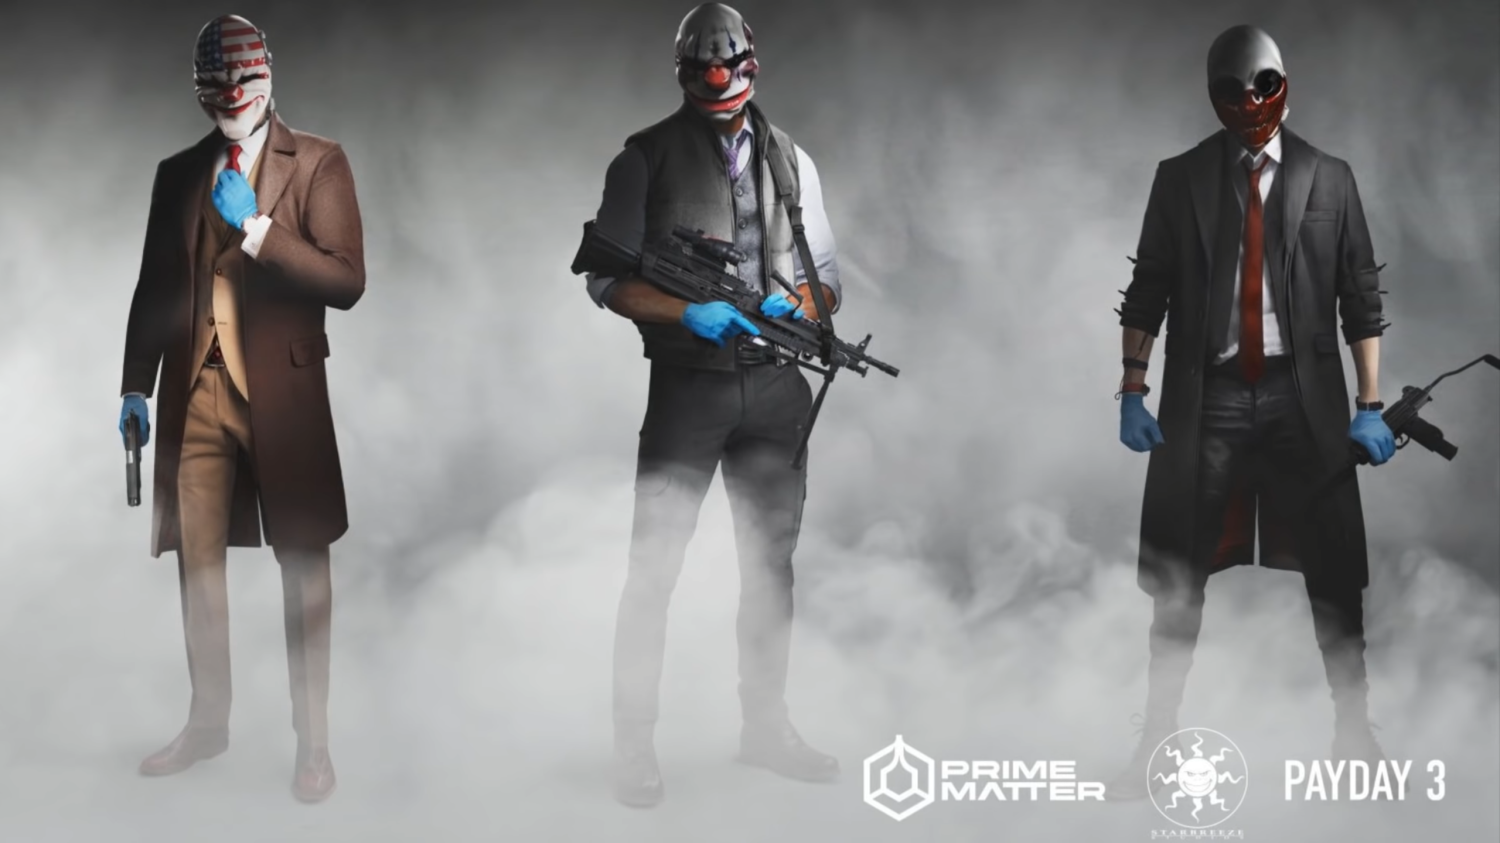 Payday 3's Turbulent Launch Spurs CEO Apology and Disgruntled Gamers